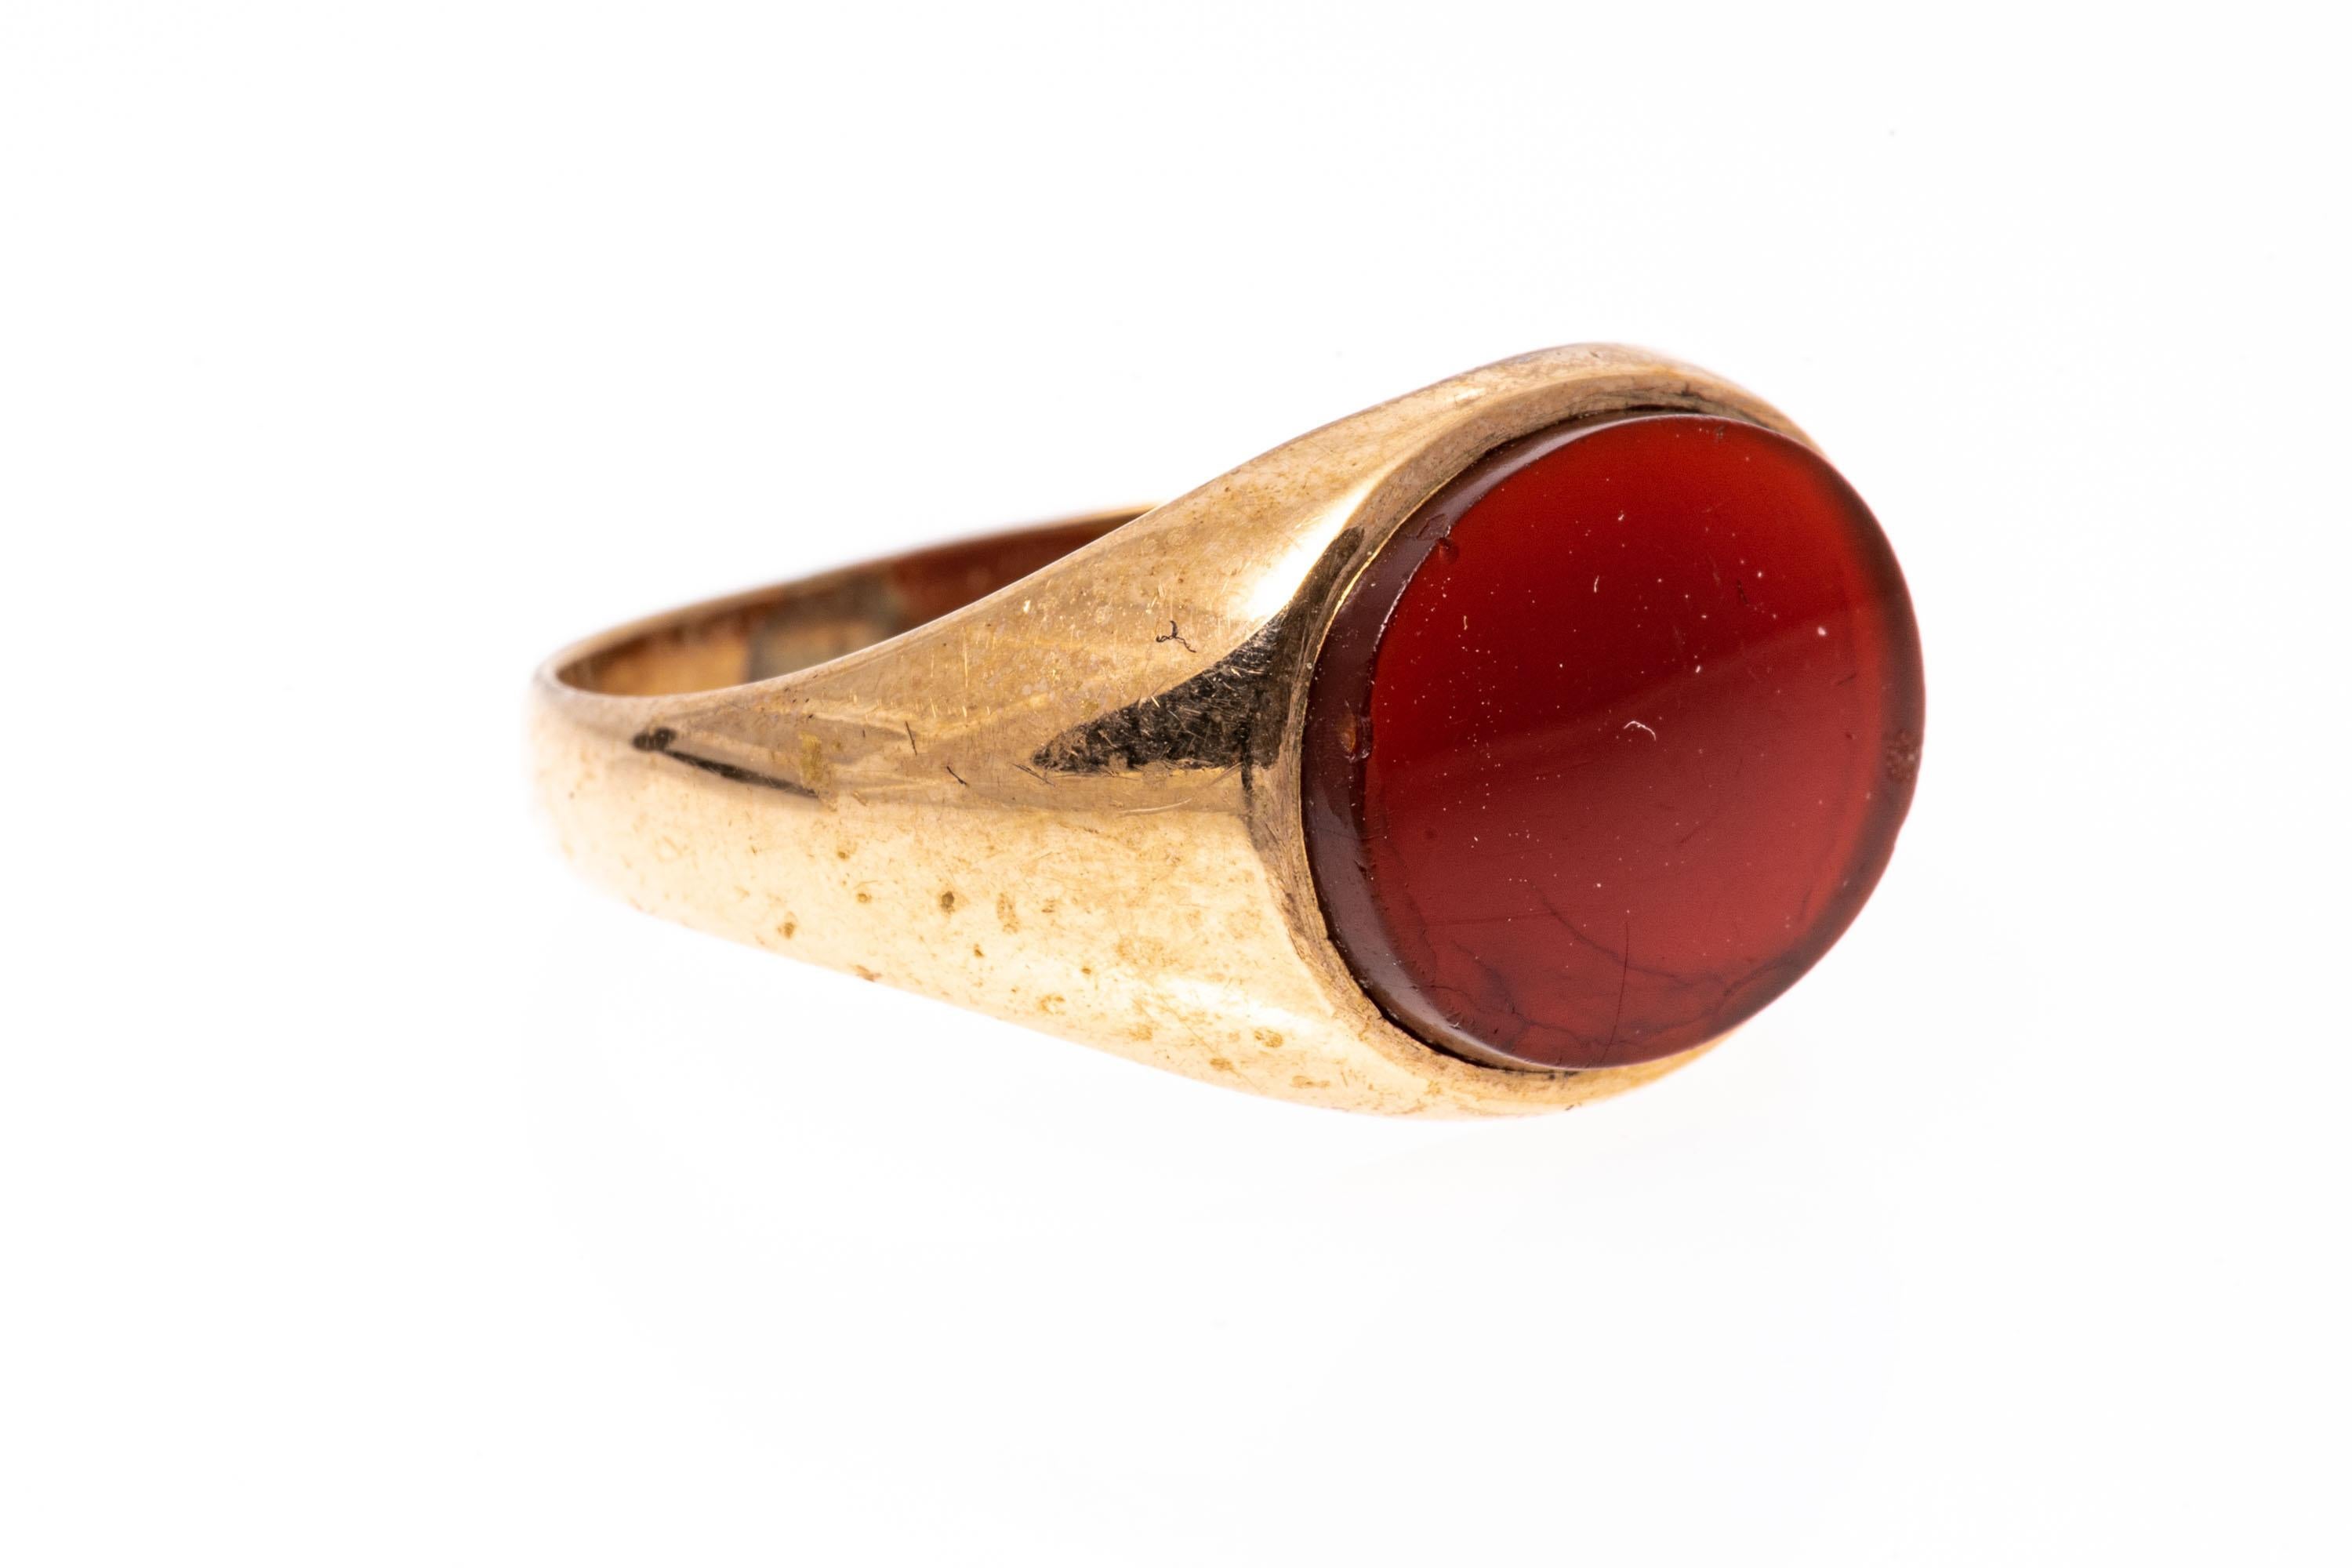 10k gold ring. This attractive signet style ring features a center, horizontal oval carnelian, adorned with wide, simple high polished sides.
Marks: None, tests 10k
Dimensions: 7/16